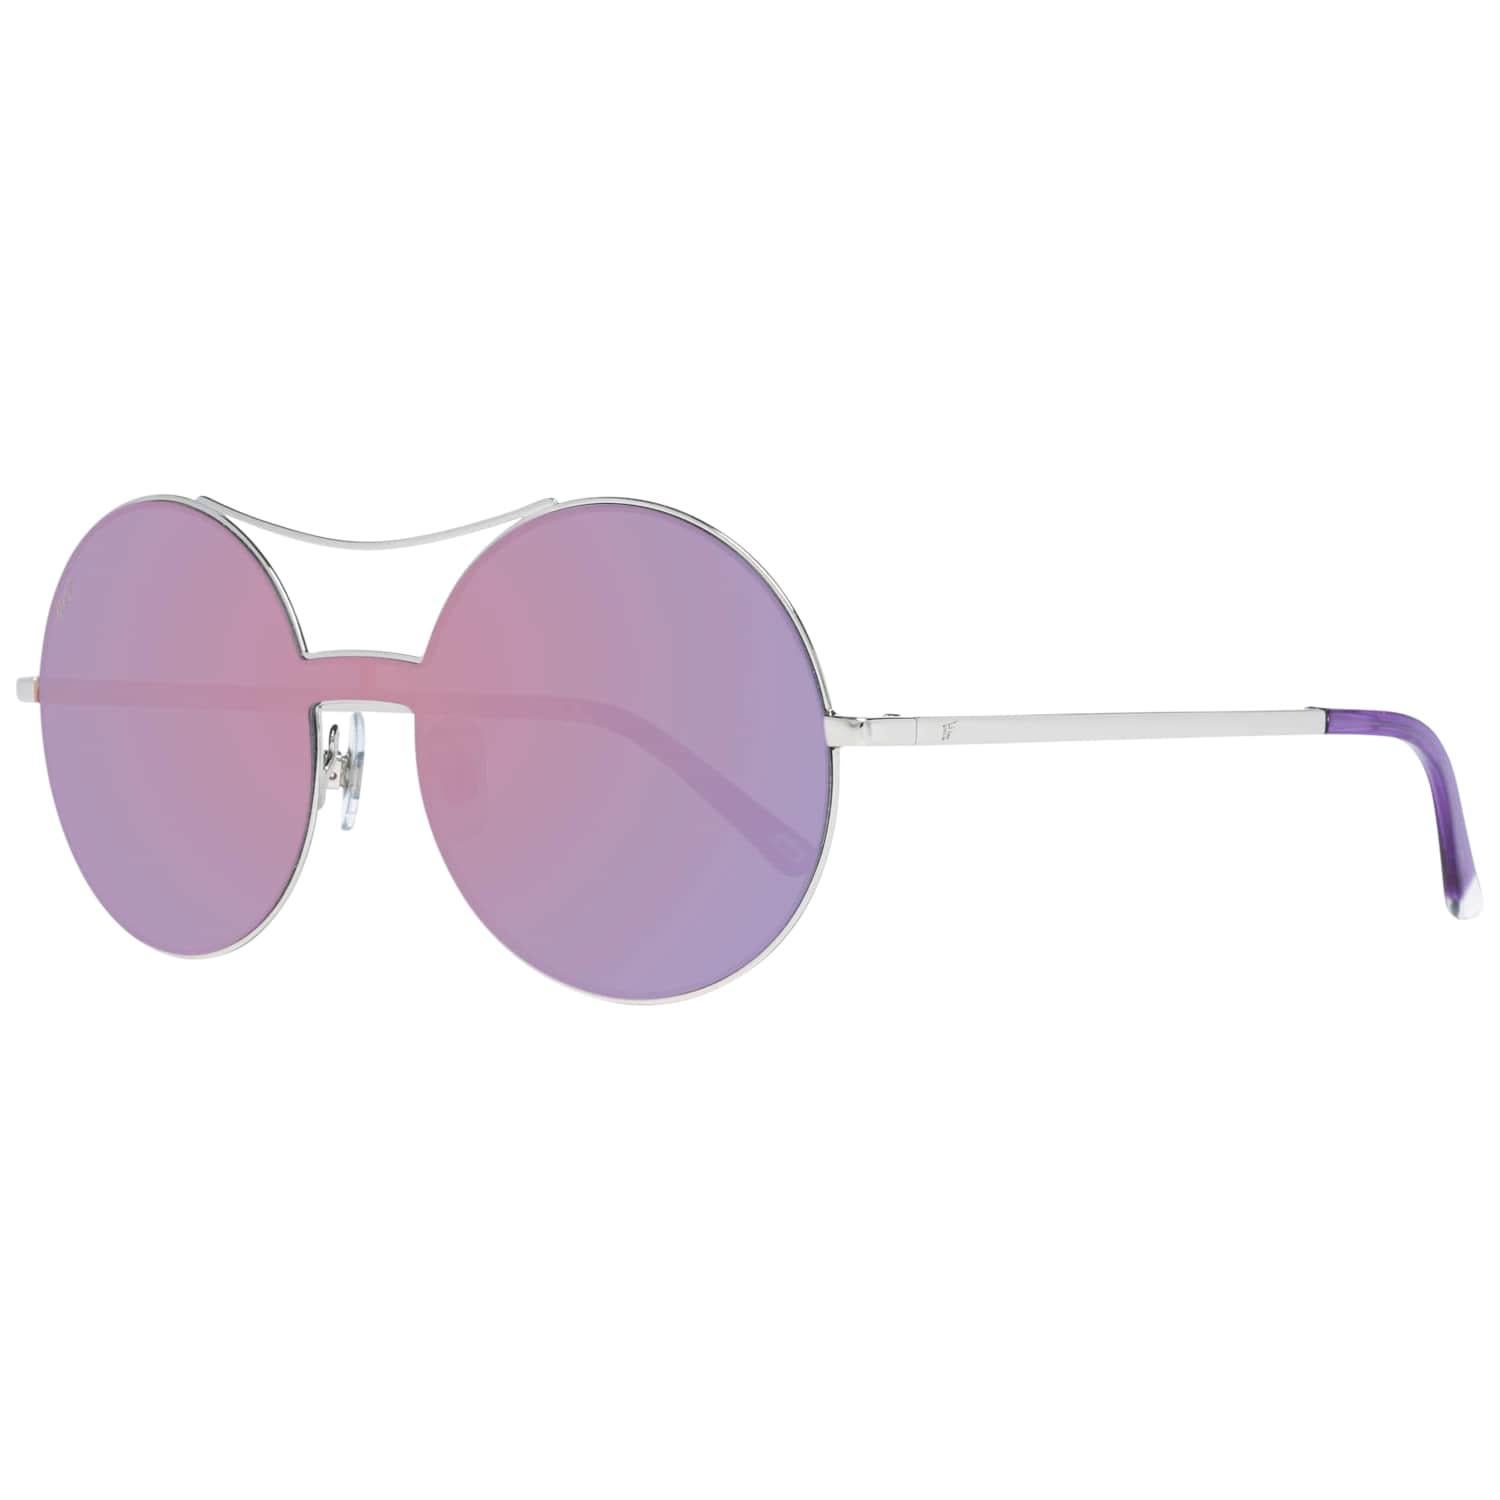 Details
MATERIAL: Metal
COLOR: Silver
MODEL: WE0211 0016Z
GENDER: Women
COUNTRY OF MANUFACTURE: China
TYPE: Sunglasses
ORIGINAL CASE?: Yes
STYLE: Round
OCCASION: Casual
FEATURES: Lightweight
LENS COLOR: Purple
LENS TECHNOLOGY: Mirrored
YEAR